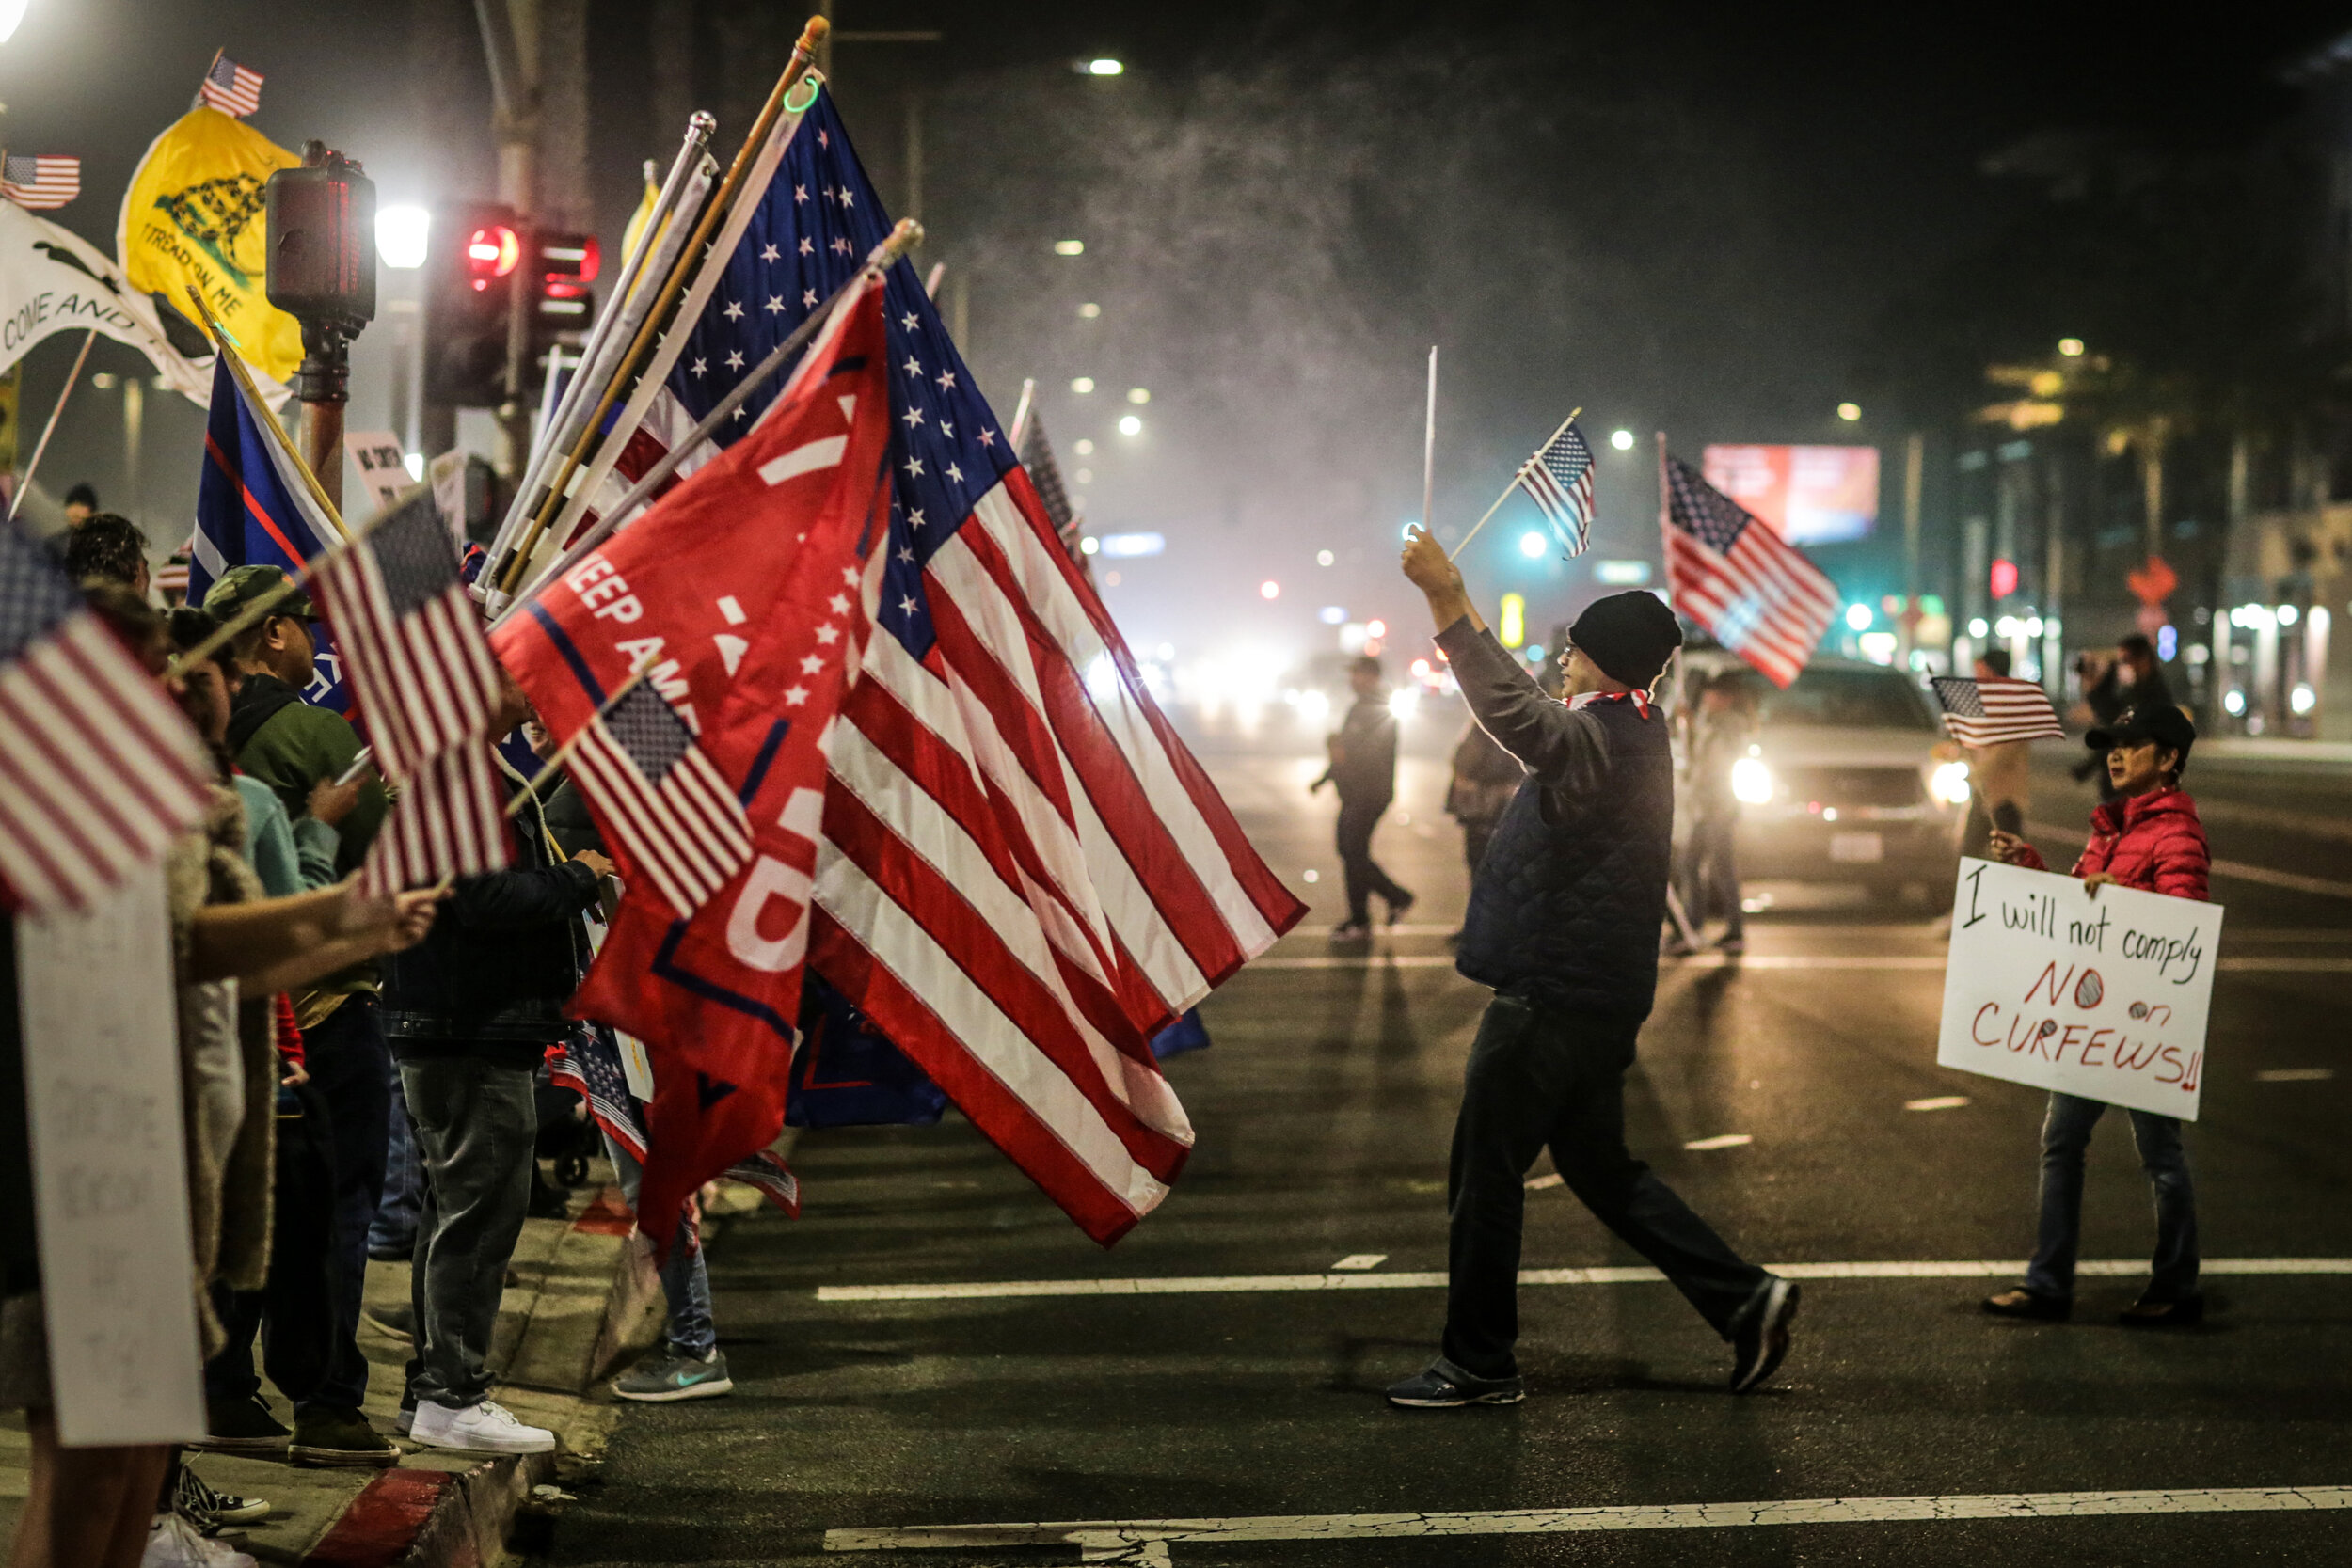  Huntington Beach, CA, Saturday, November 21, 2020 - As Covid-19 cases reach record numbers in the U.S. and California, hundreds protest a State mandated curfew of 10 pm.  Following the lead of President Donald Trump, “Covid deniers” gathered, unmask